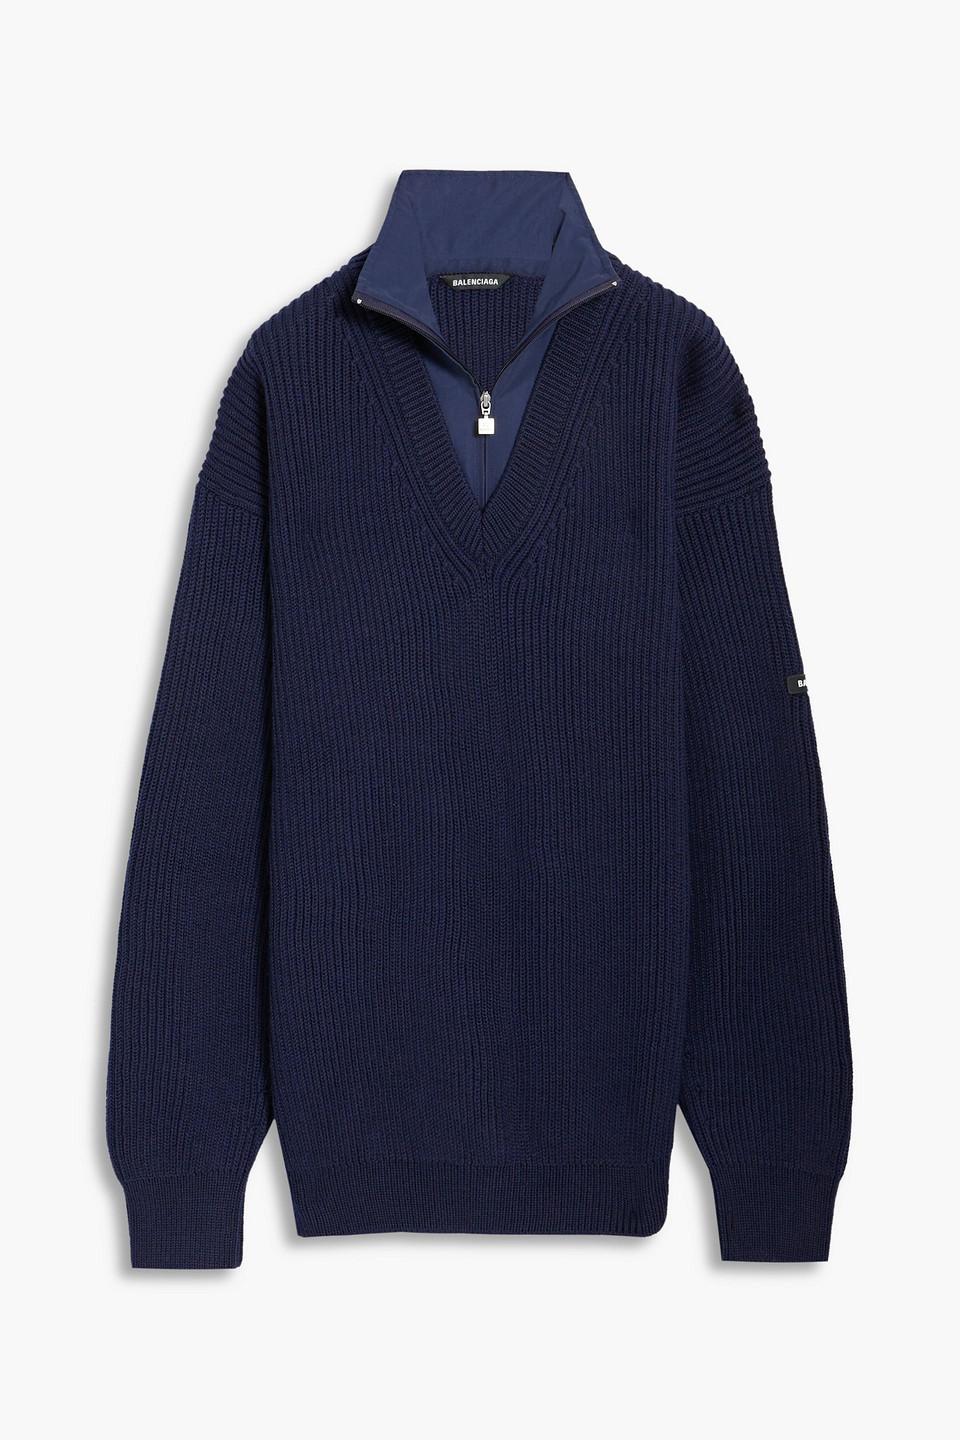 Balenciaga Shell-paneled Ribbed Wool Half-zip Sweater in Blue for Men | Lyst